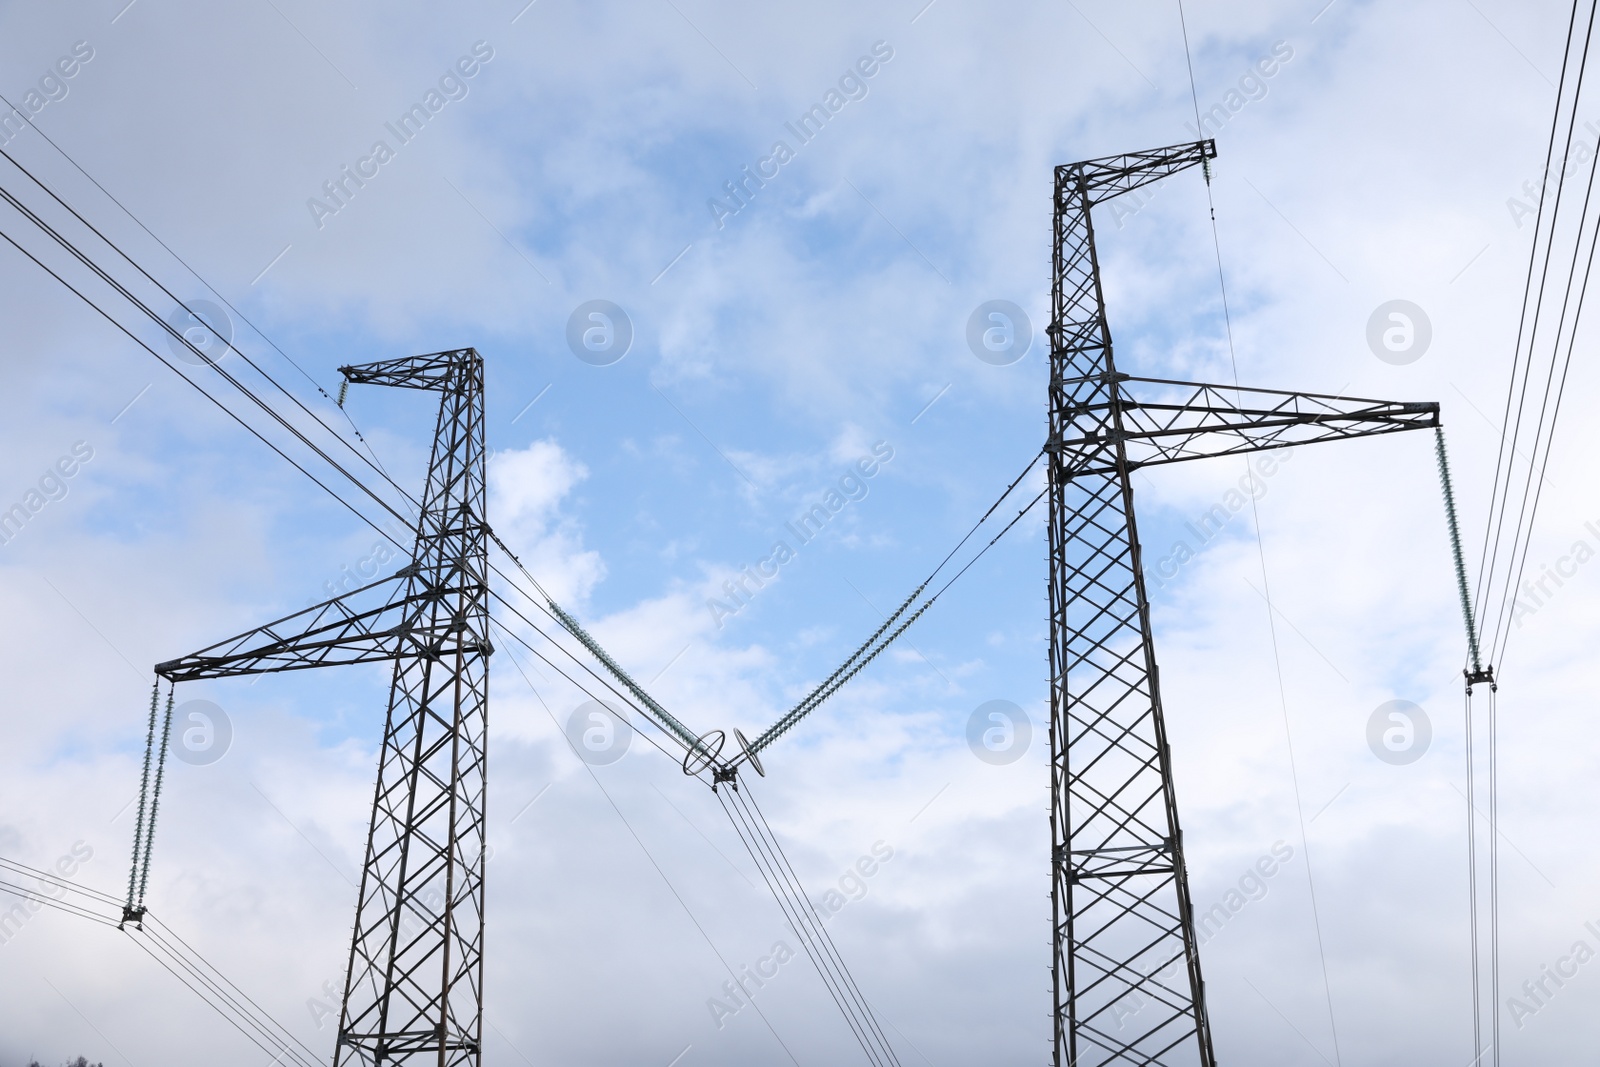 Photo of High-voltage towers with electricity transmission power lines against blue cloudy sky